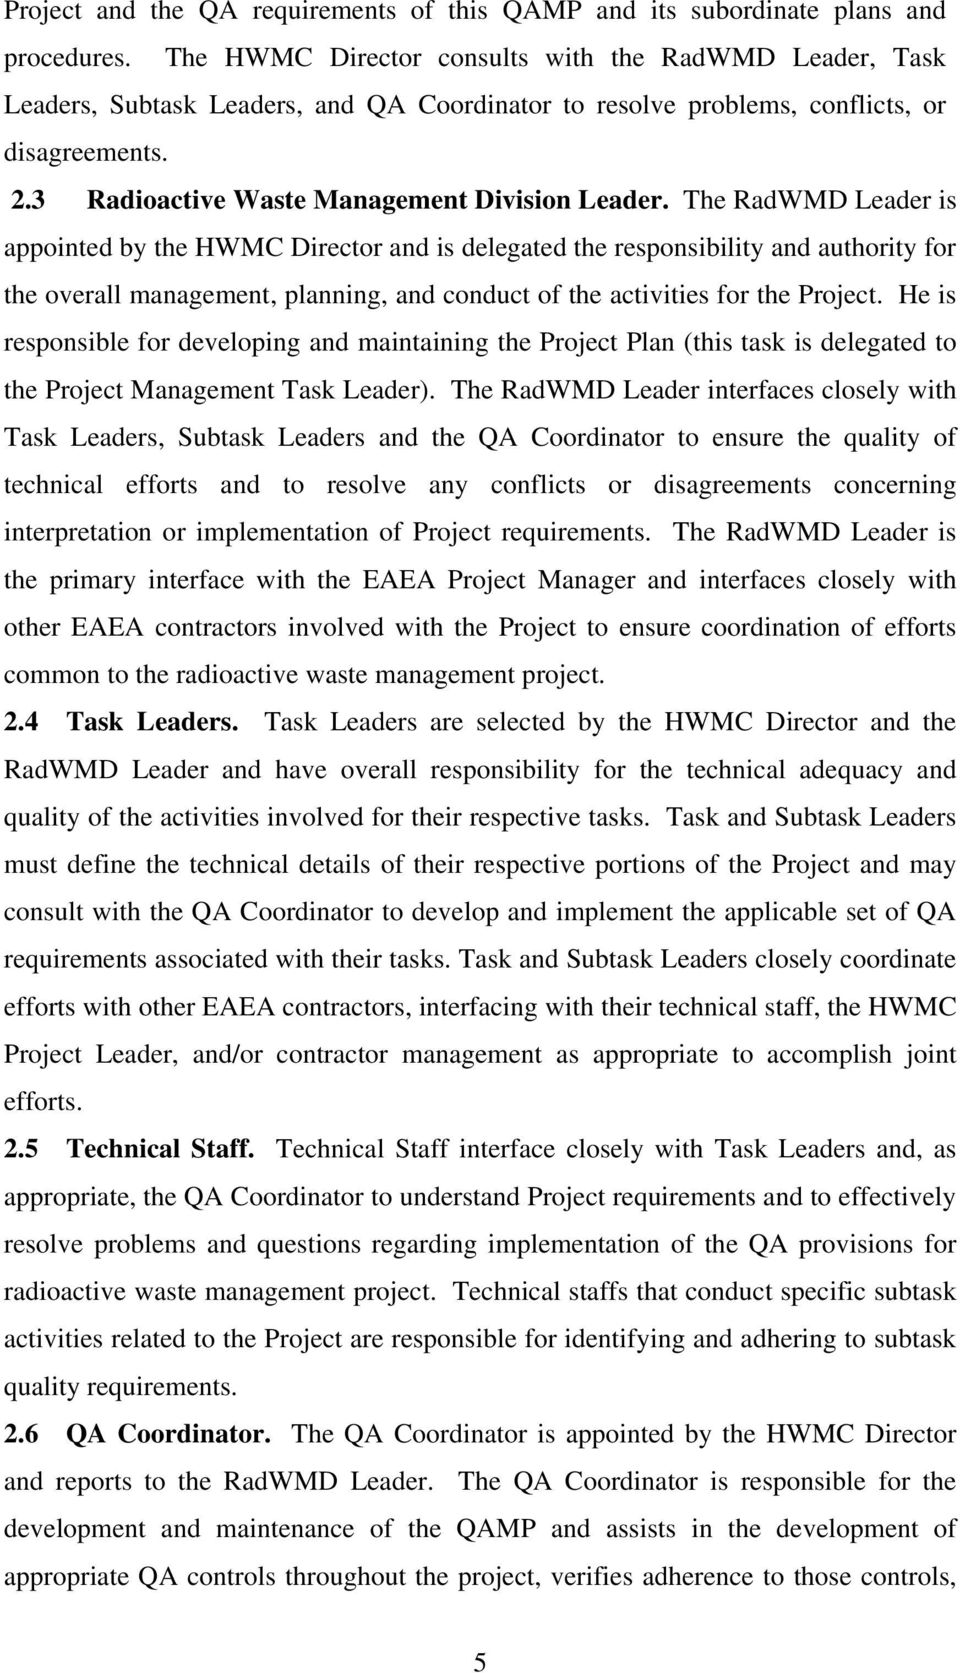 The RadWMD Leader is appointed by the HWMC Director and is delegated the responsibility and authority for the overall management, planning, and conduct of the activities for the Project.